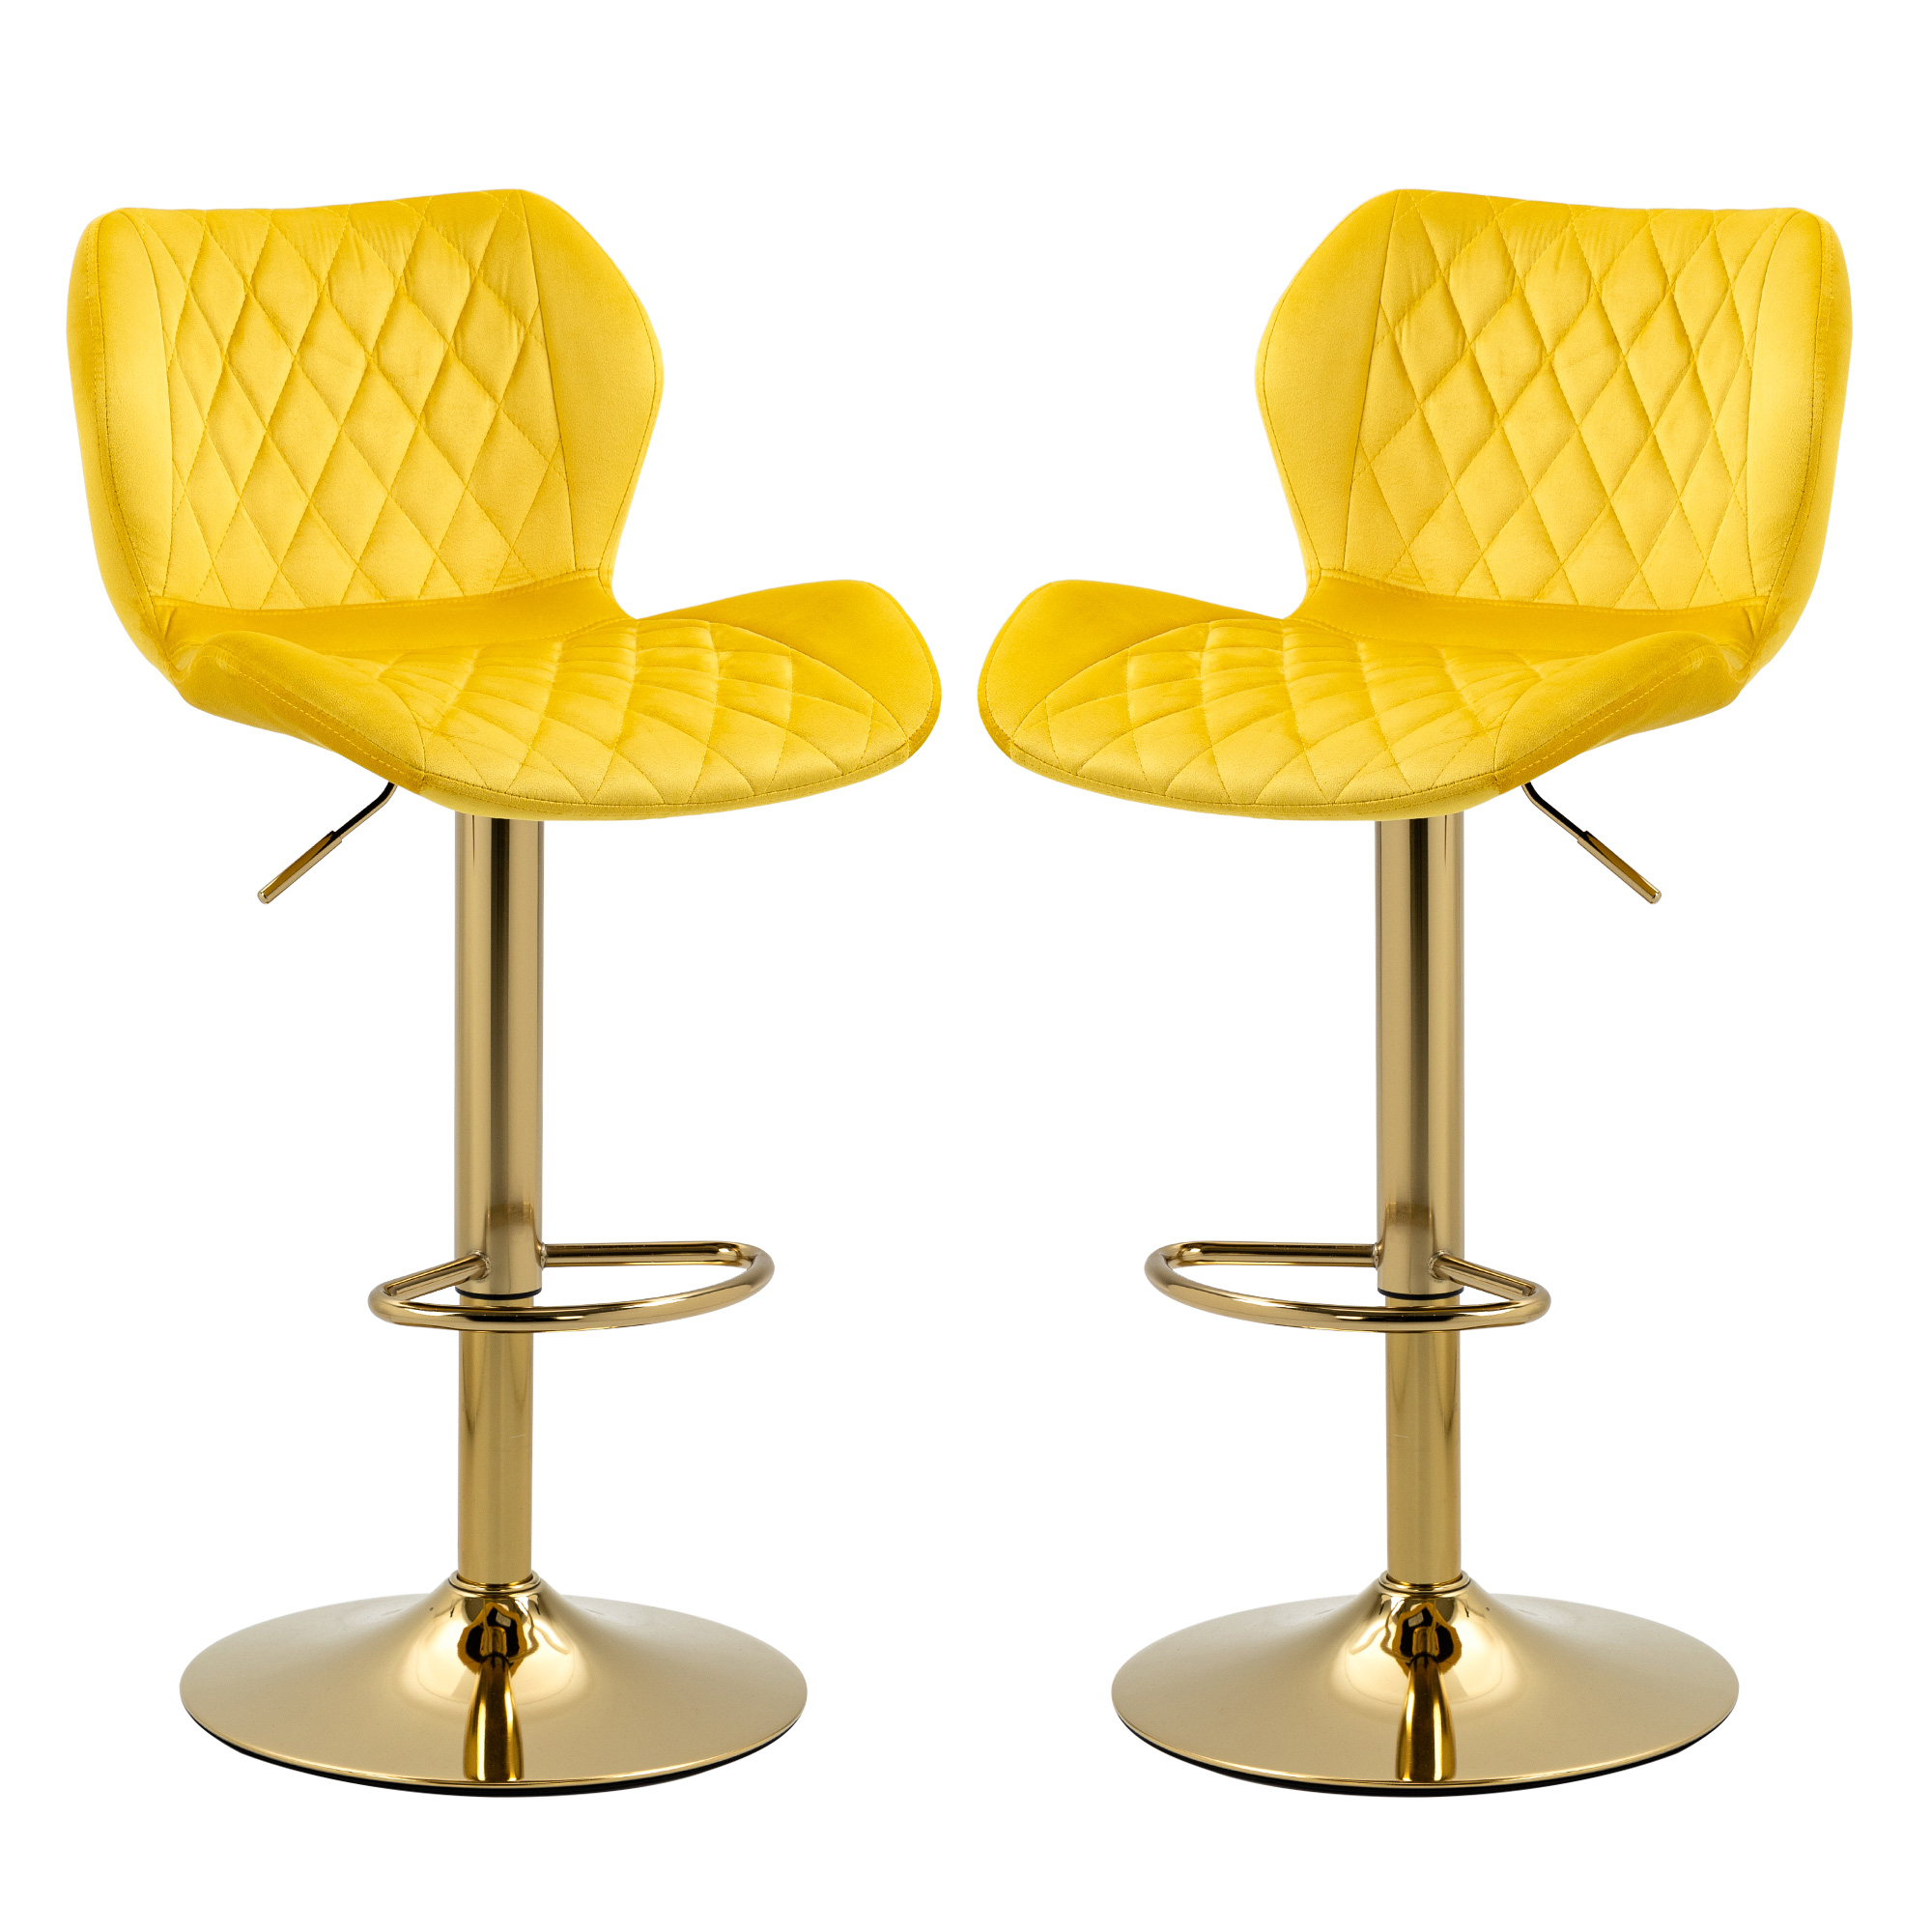 Yellow Velvet Adjustable Swivel Bar Stools Set Of 2 Modern Counter Height Barstools With Golden Color Base